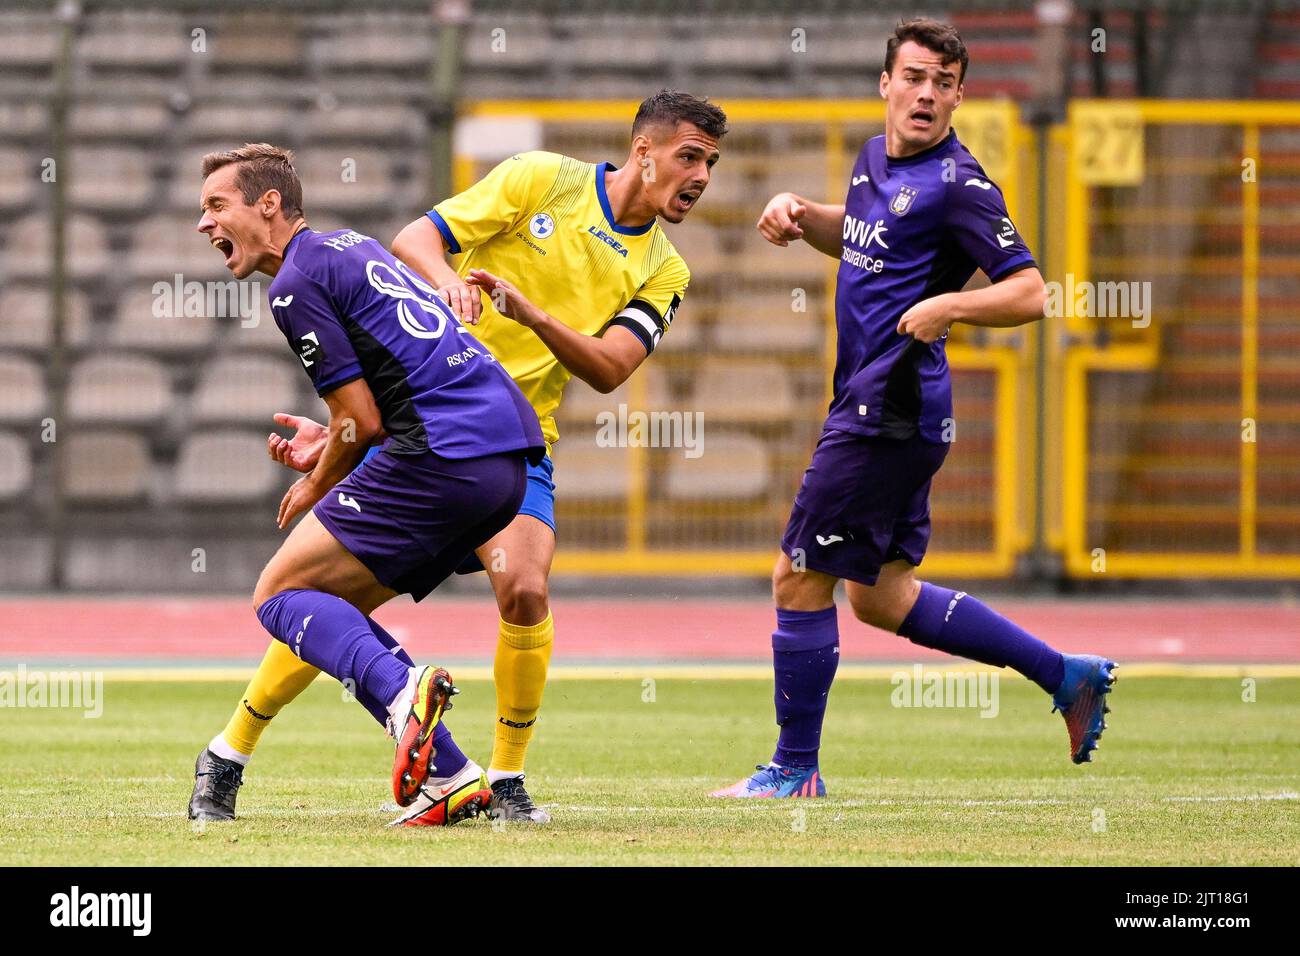 RSCA Futures Mohamed Bouchouari celebrates after scoring during a soccer  match between RSC